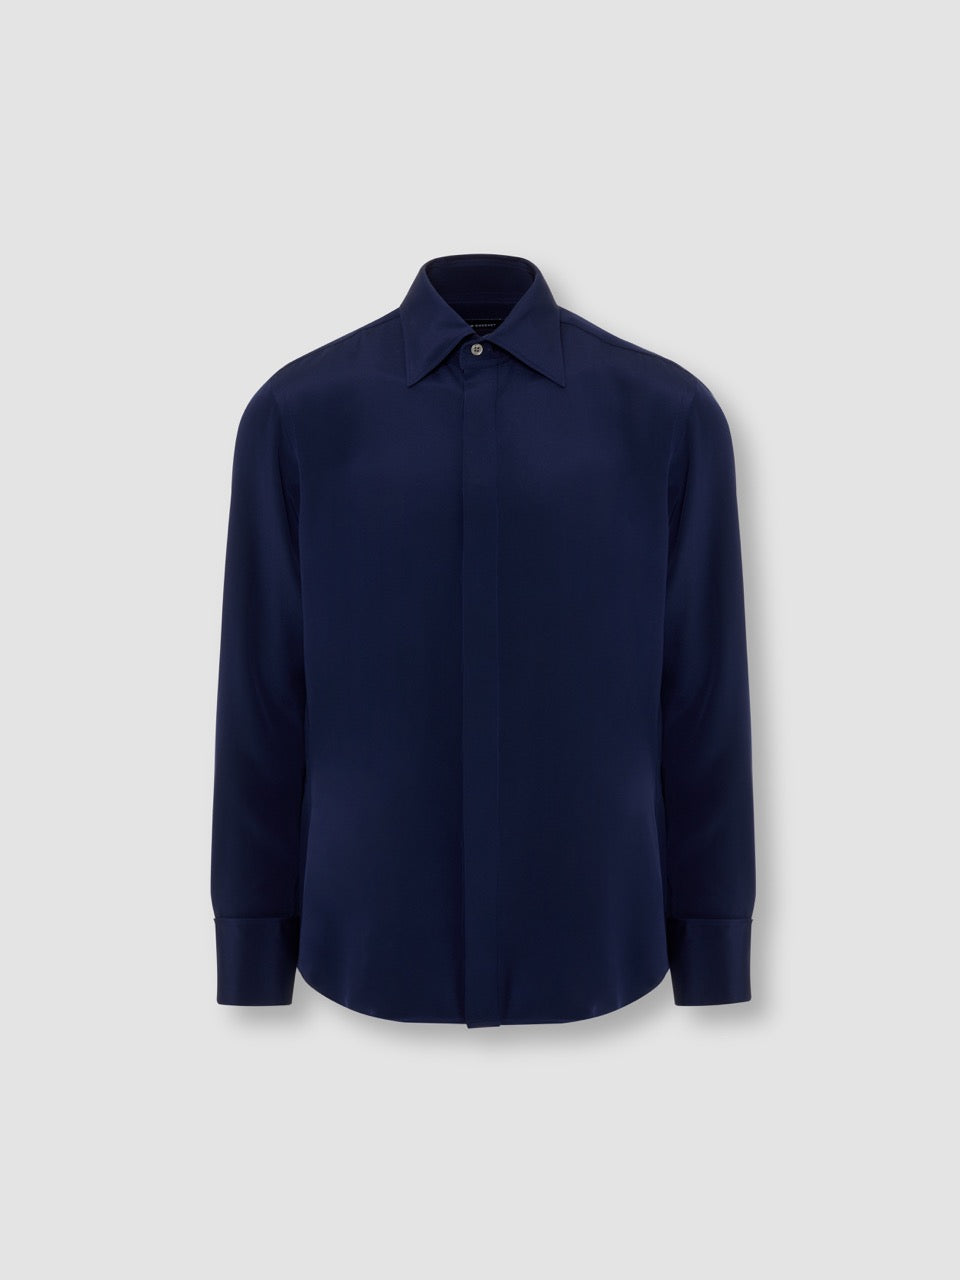 Silk Lecce Collar Fly Front Shirt Navy Product Image